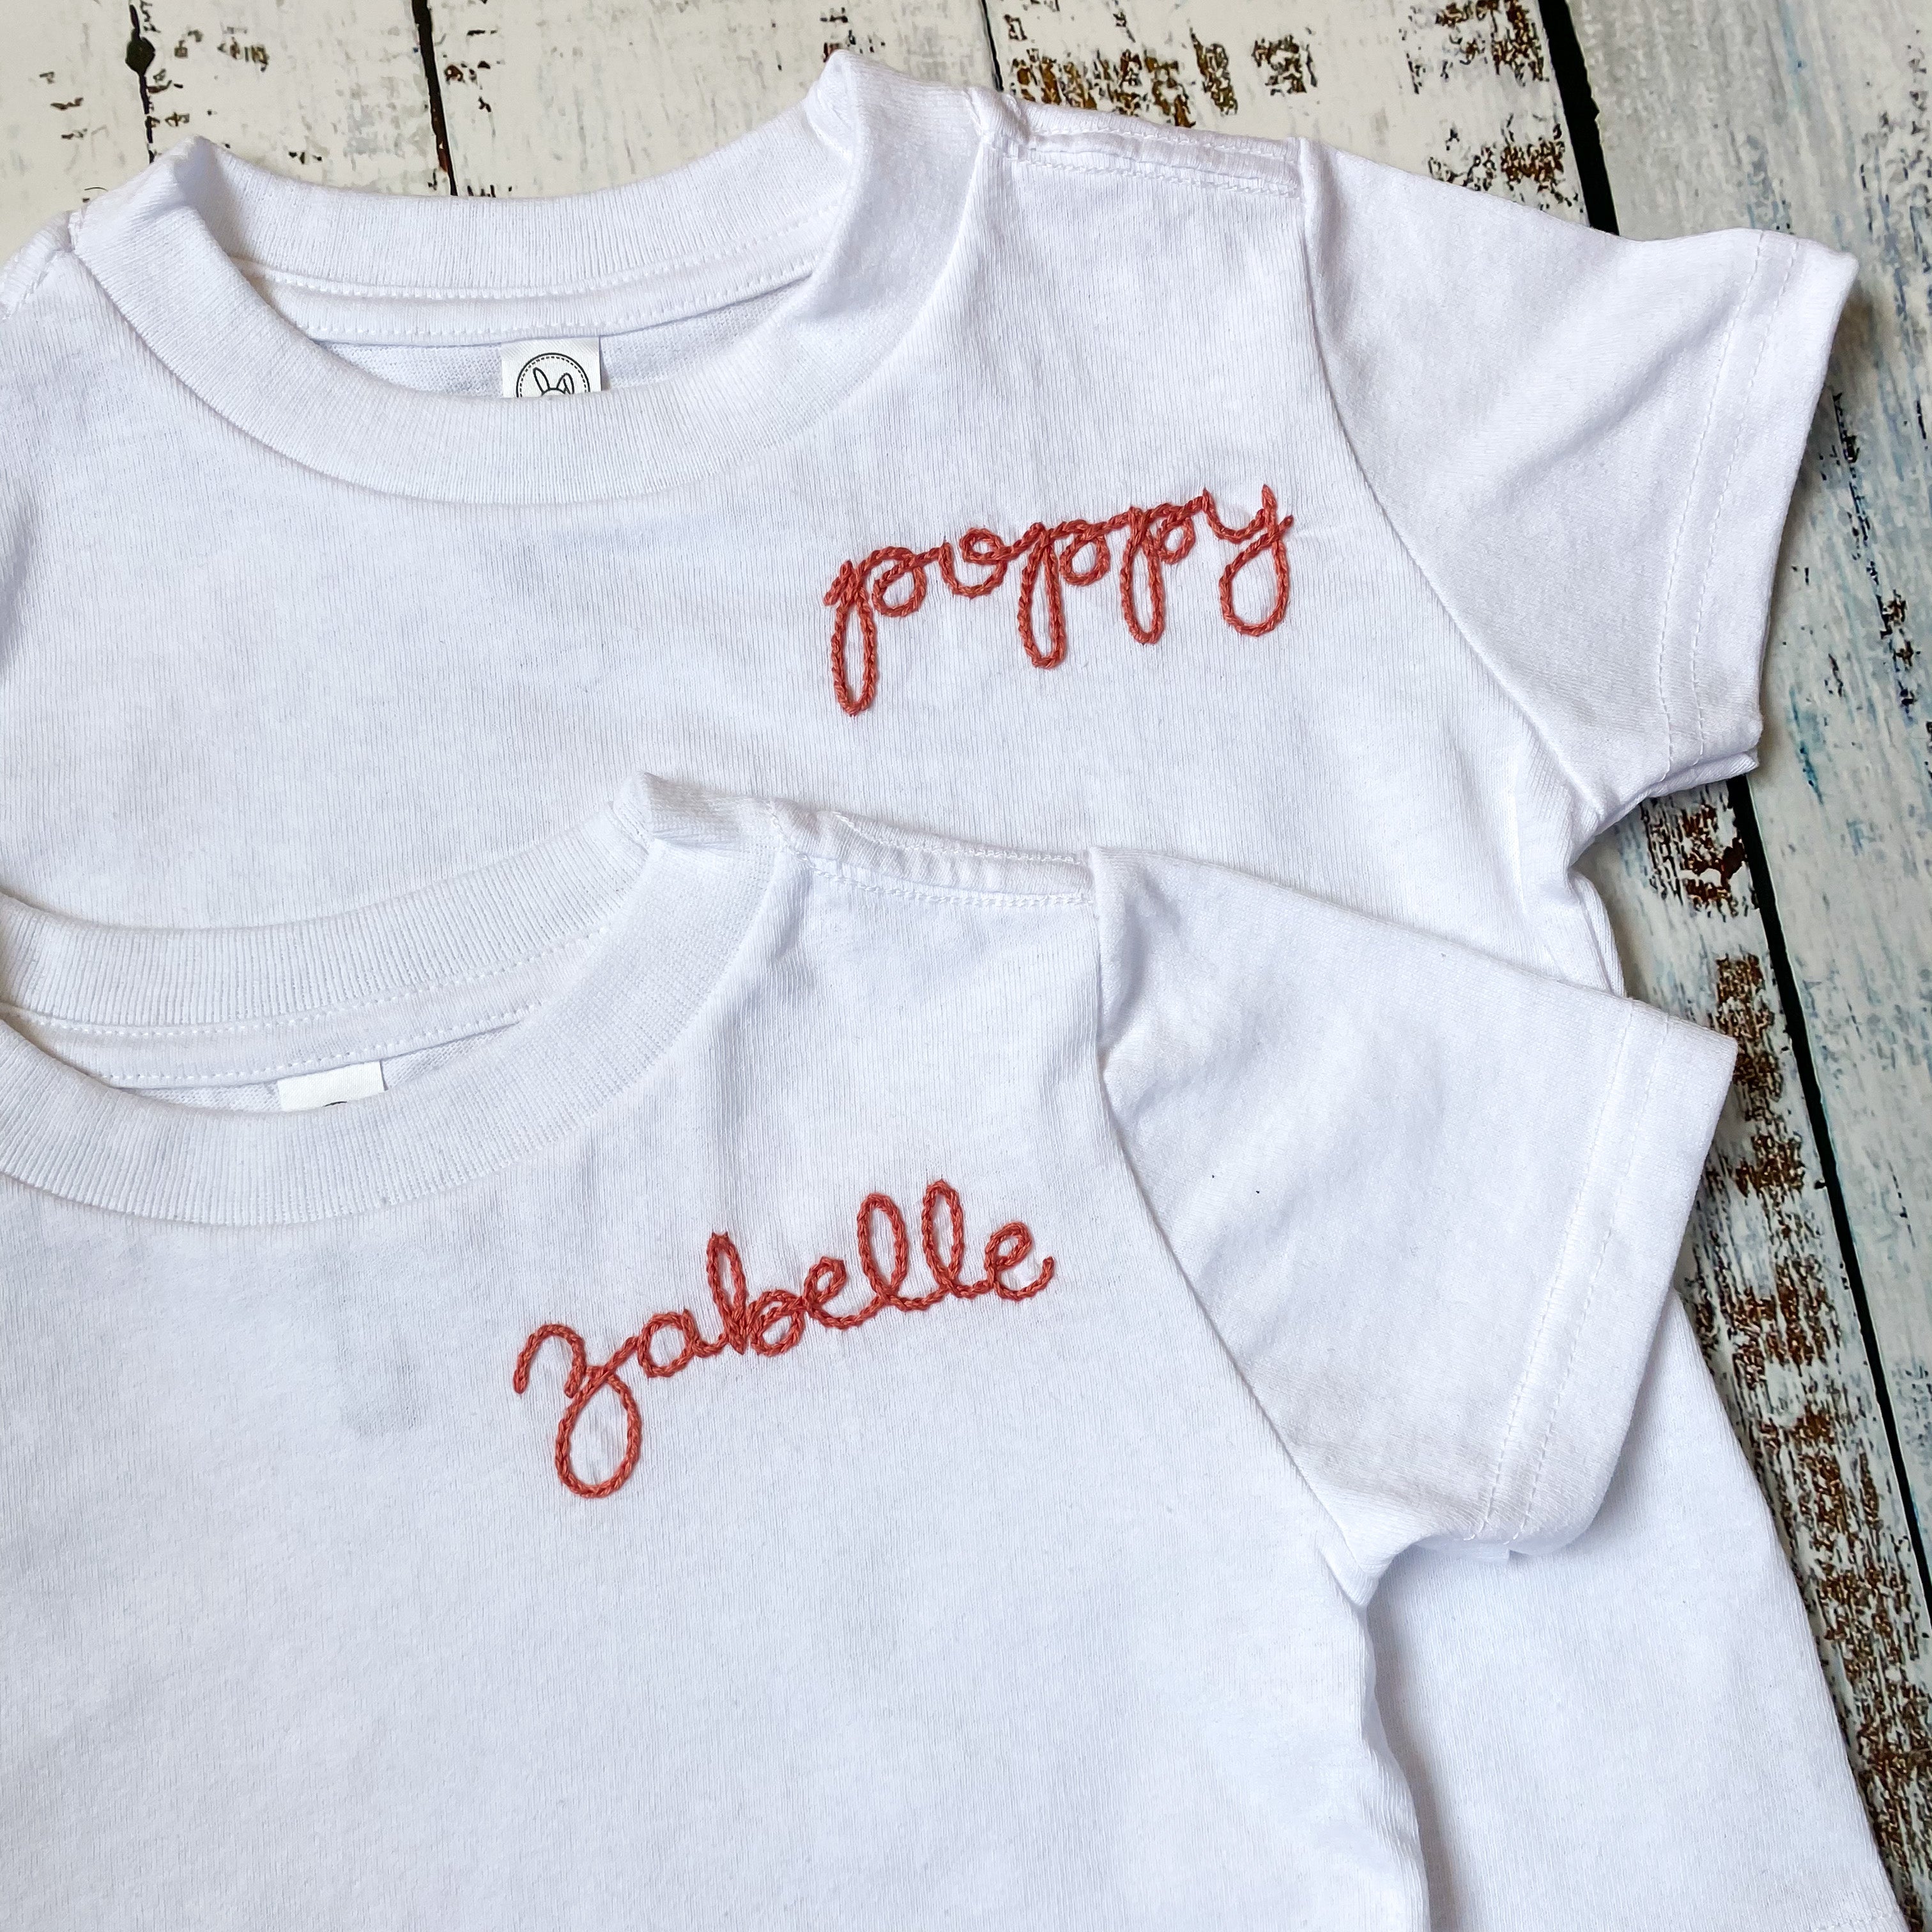 Kids Name T-shirt. Custom Embroidered Shirts. Personalized Girl Name Tee.  Toddler Shirt With Name Embroidery for Girl and Boy. -  Canada